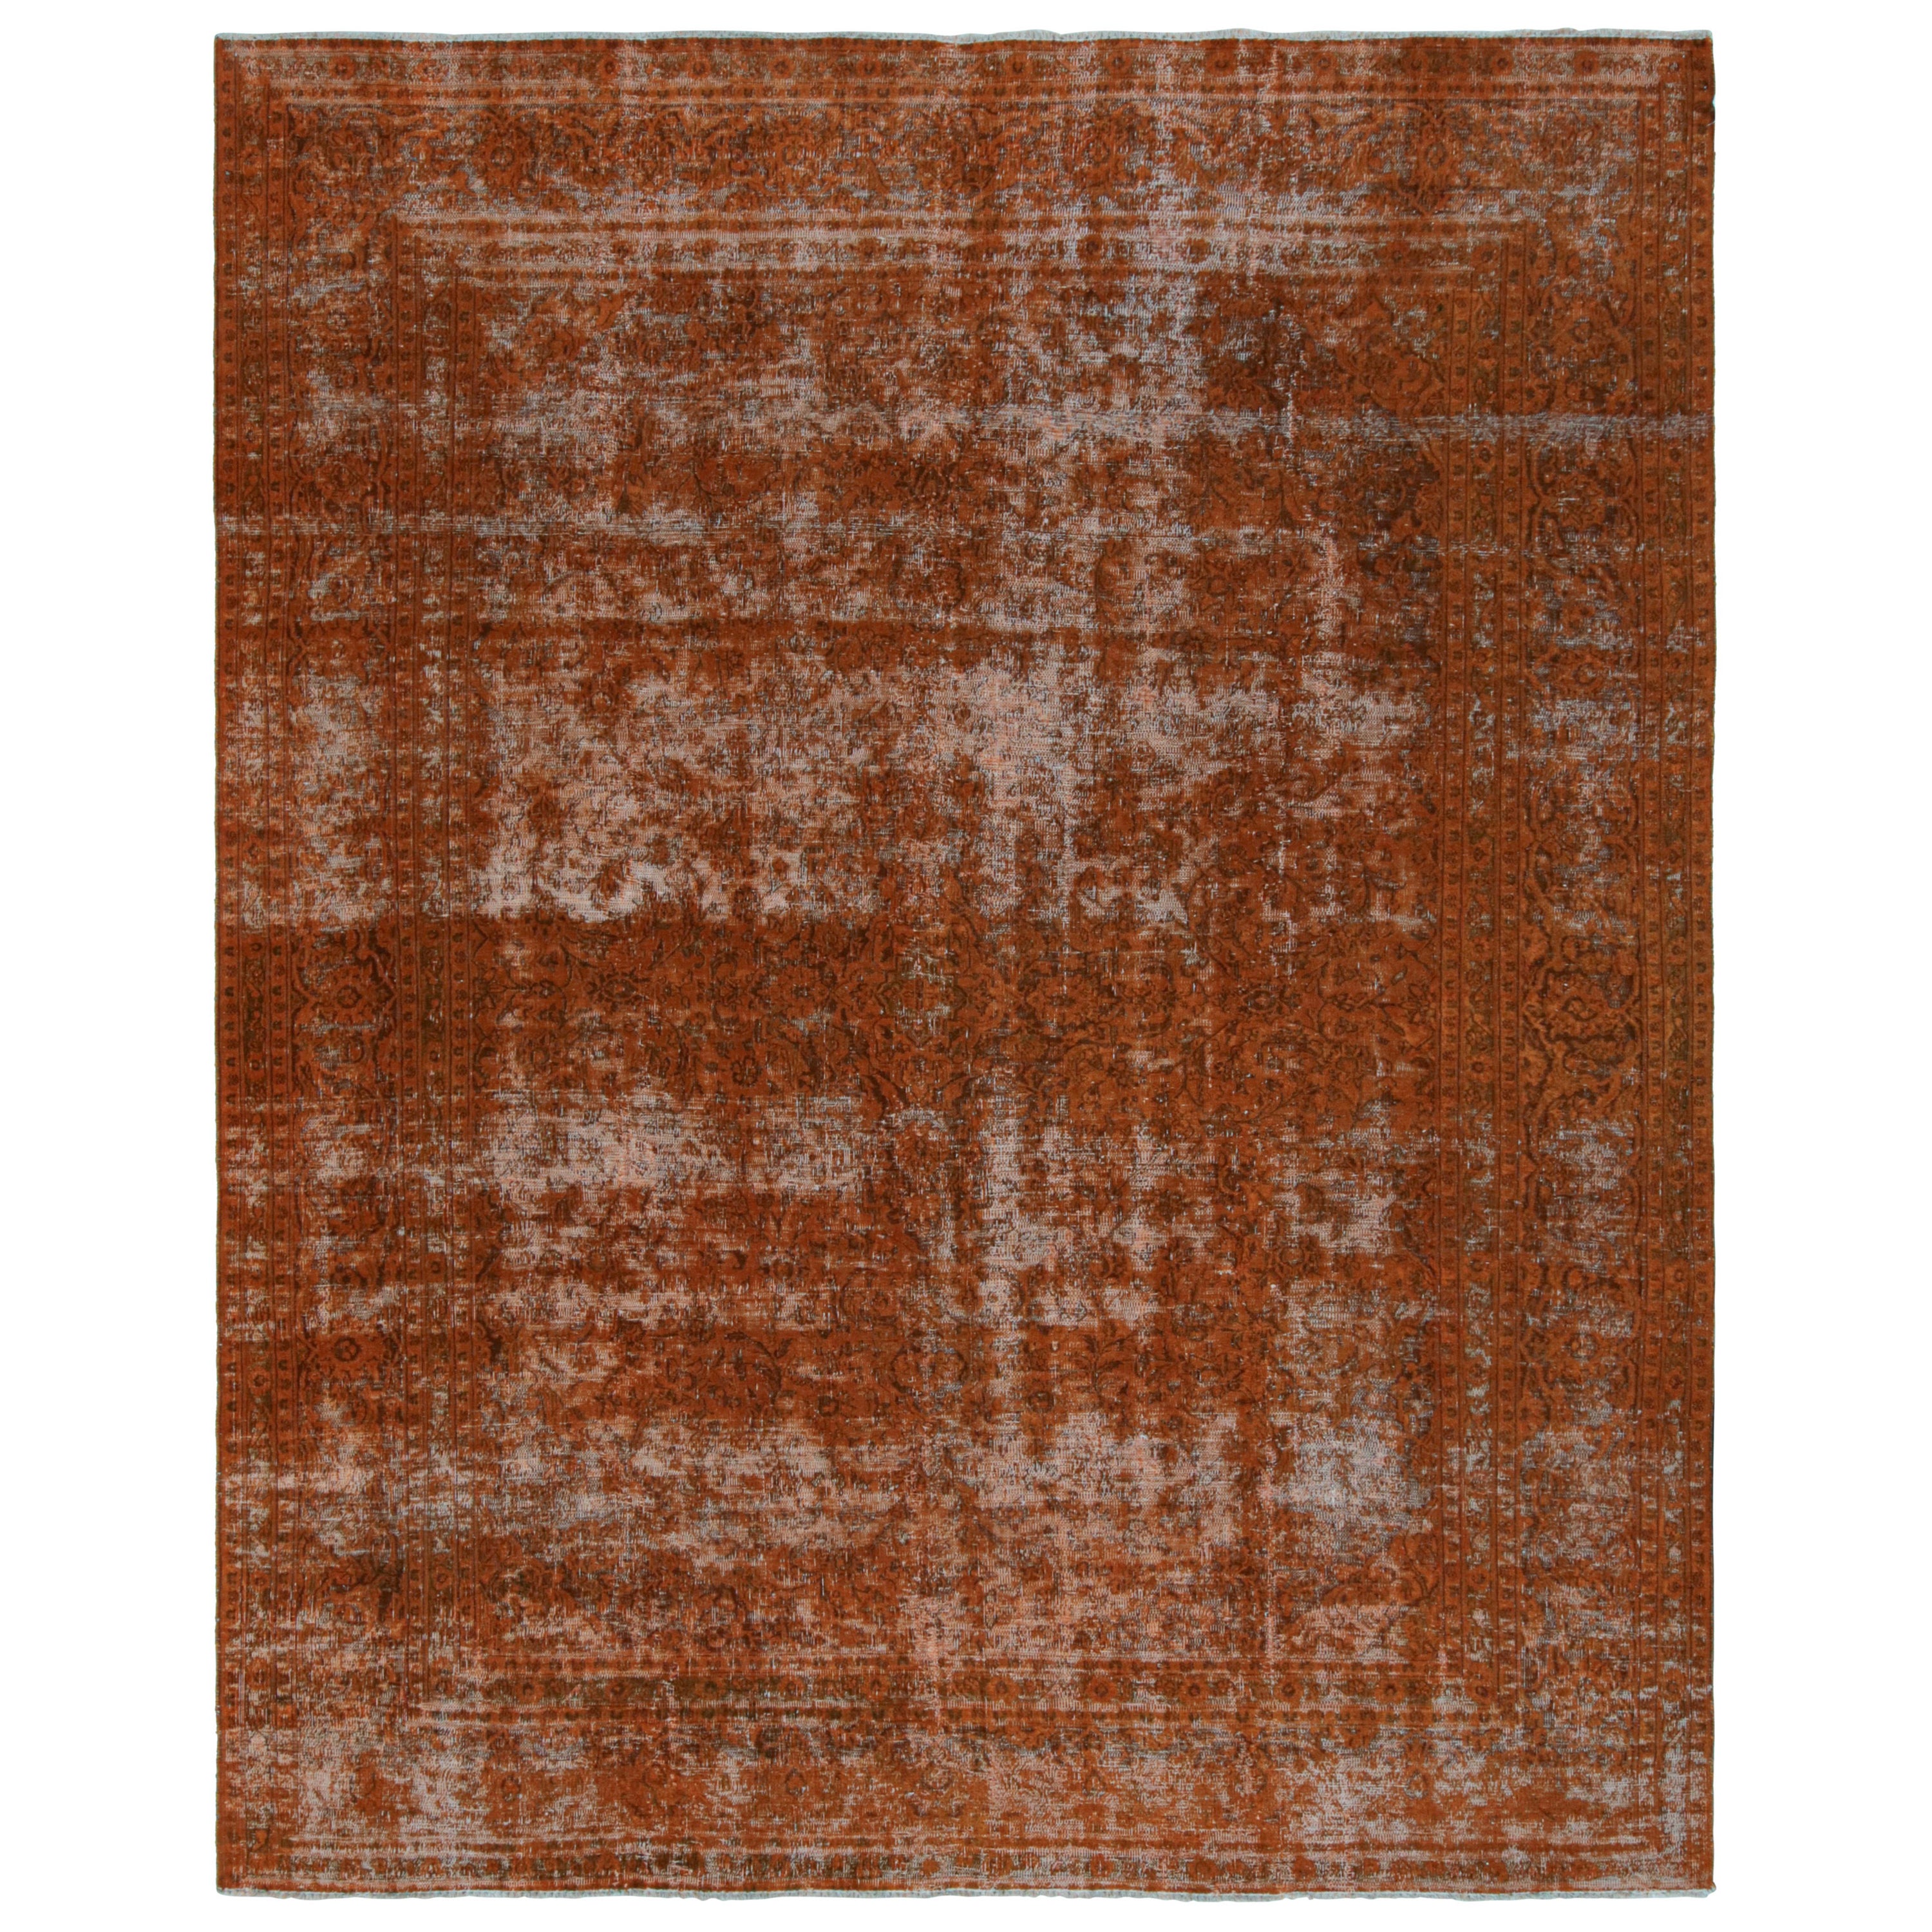 Vintage Persian Rug in Rust Orange and Brown Floral Patterns, From Rug & Kilim For Sale